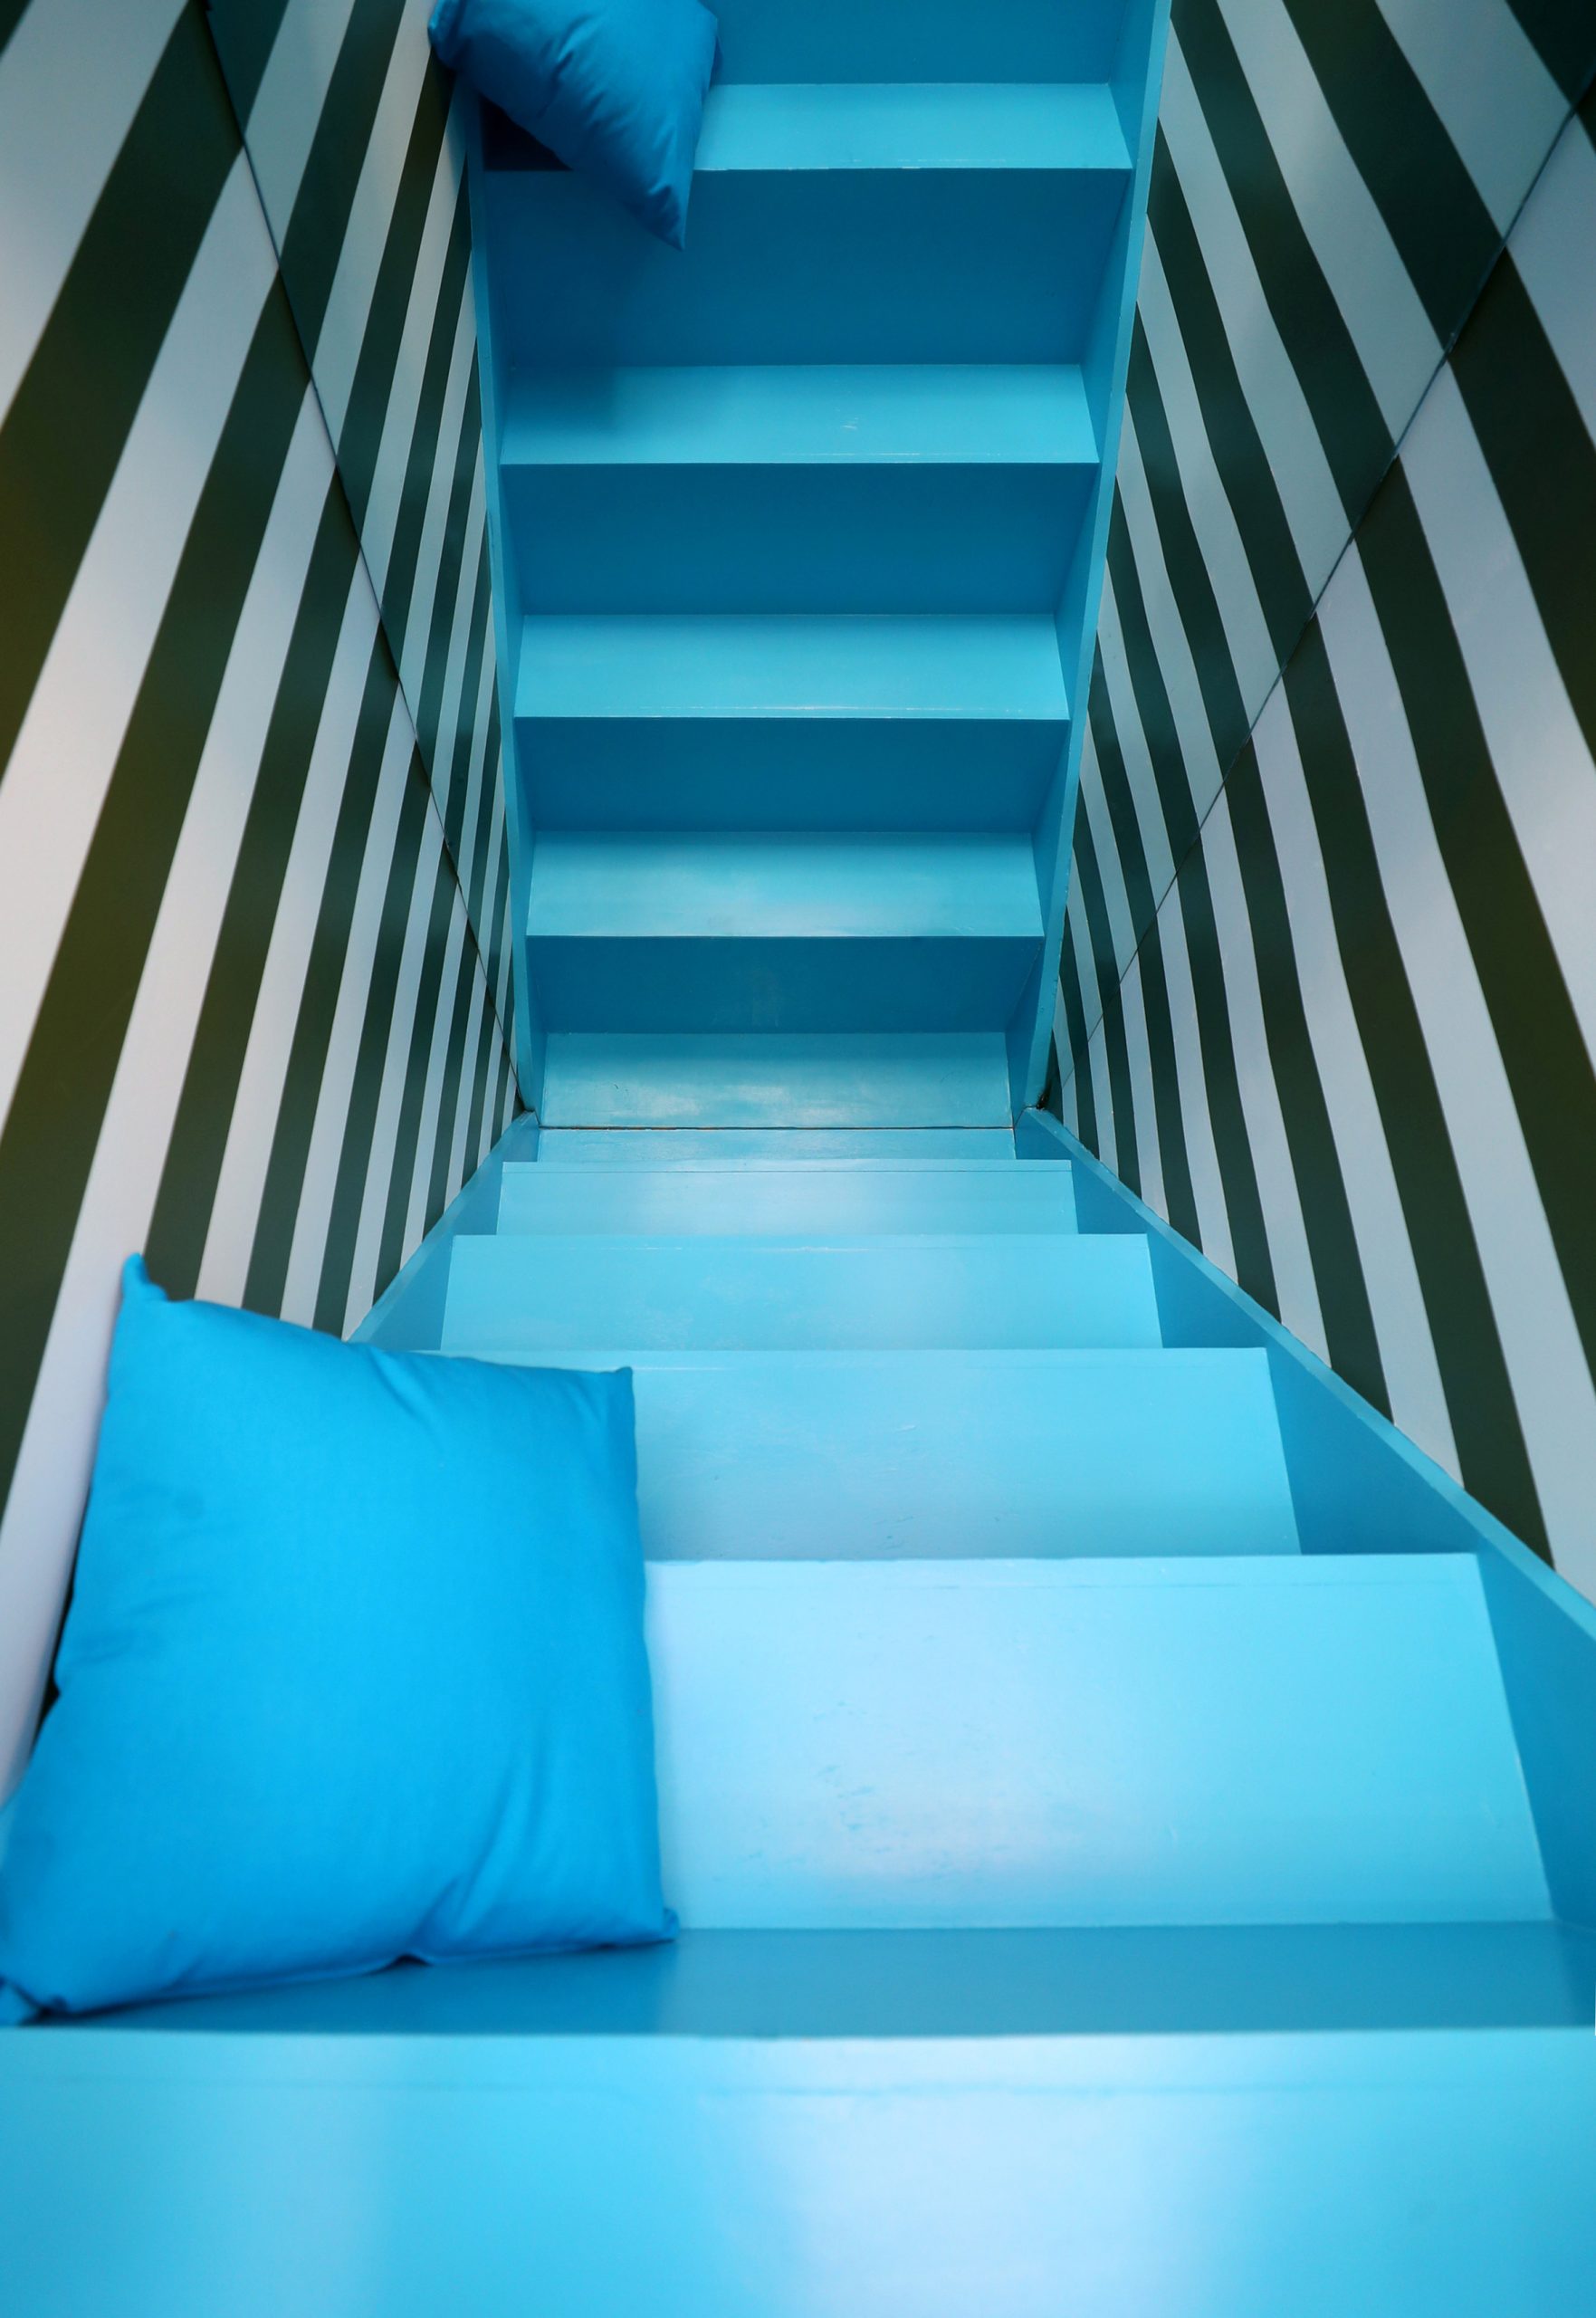 Details of what the designers describe as an Alice in Wonderland stairway